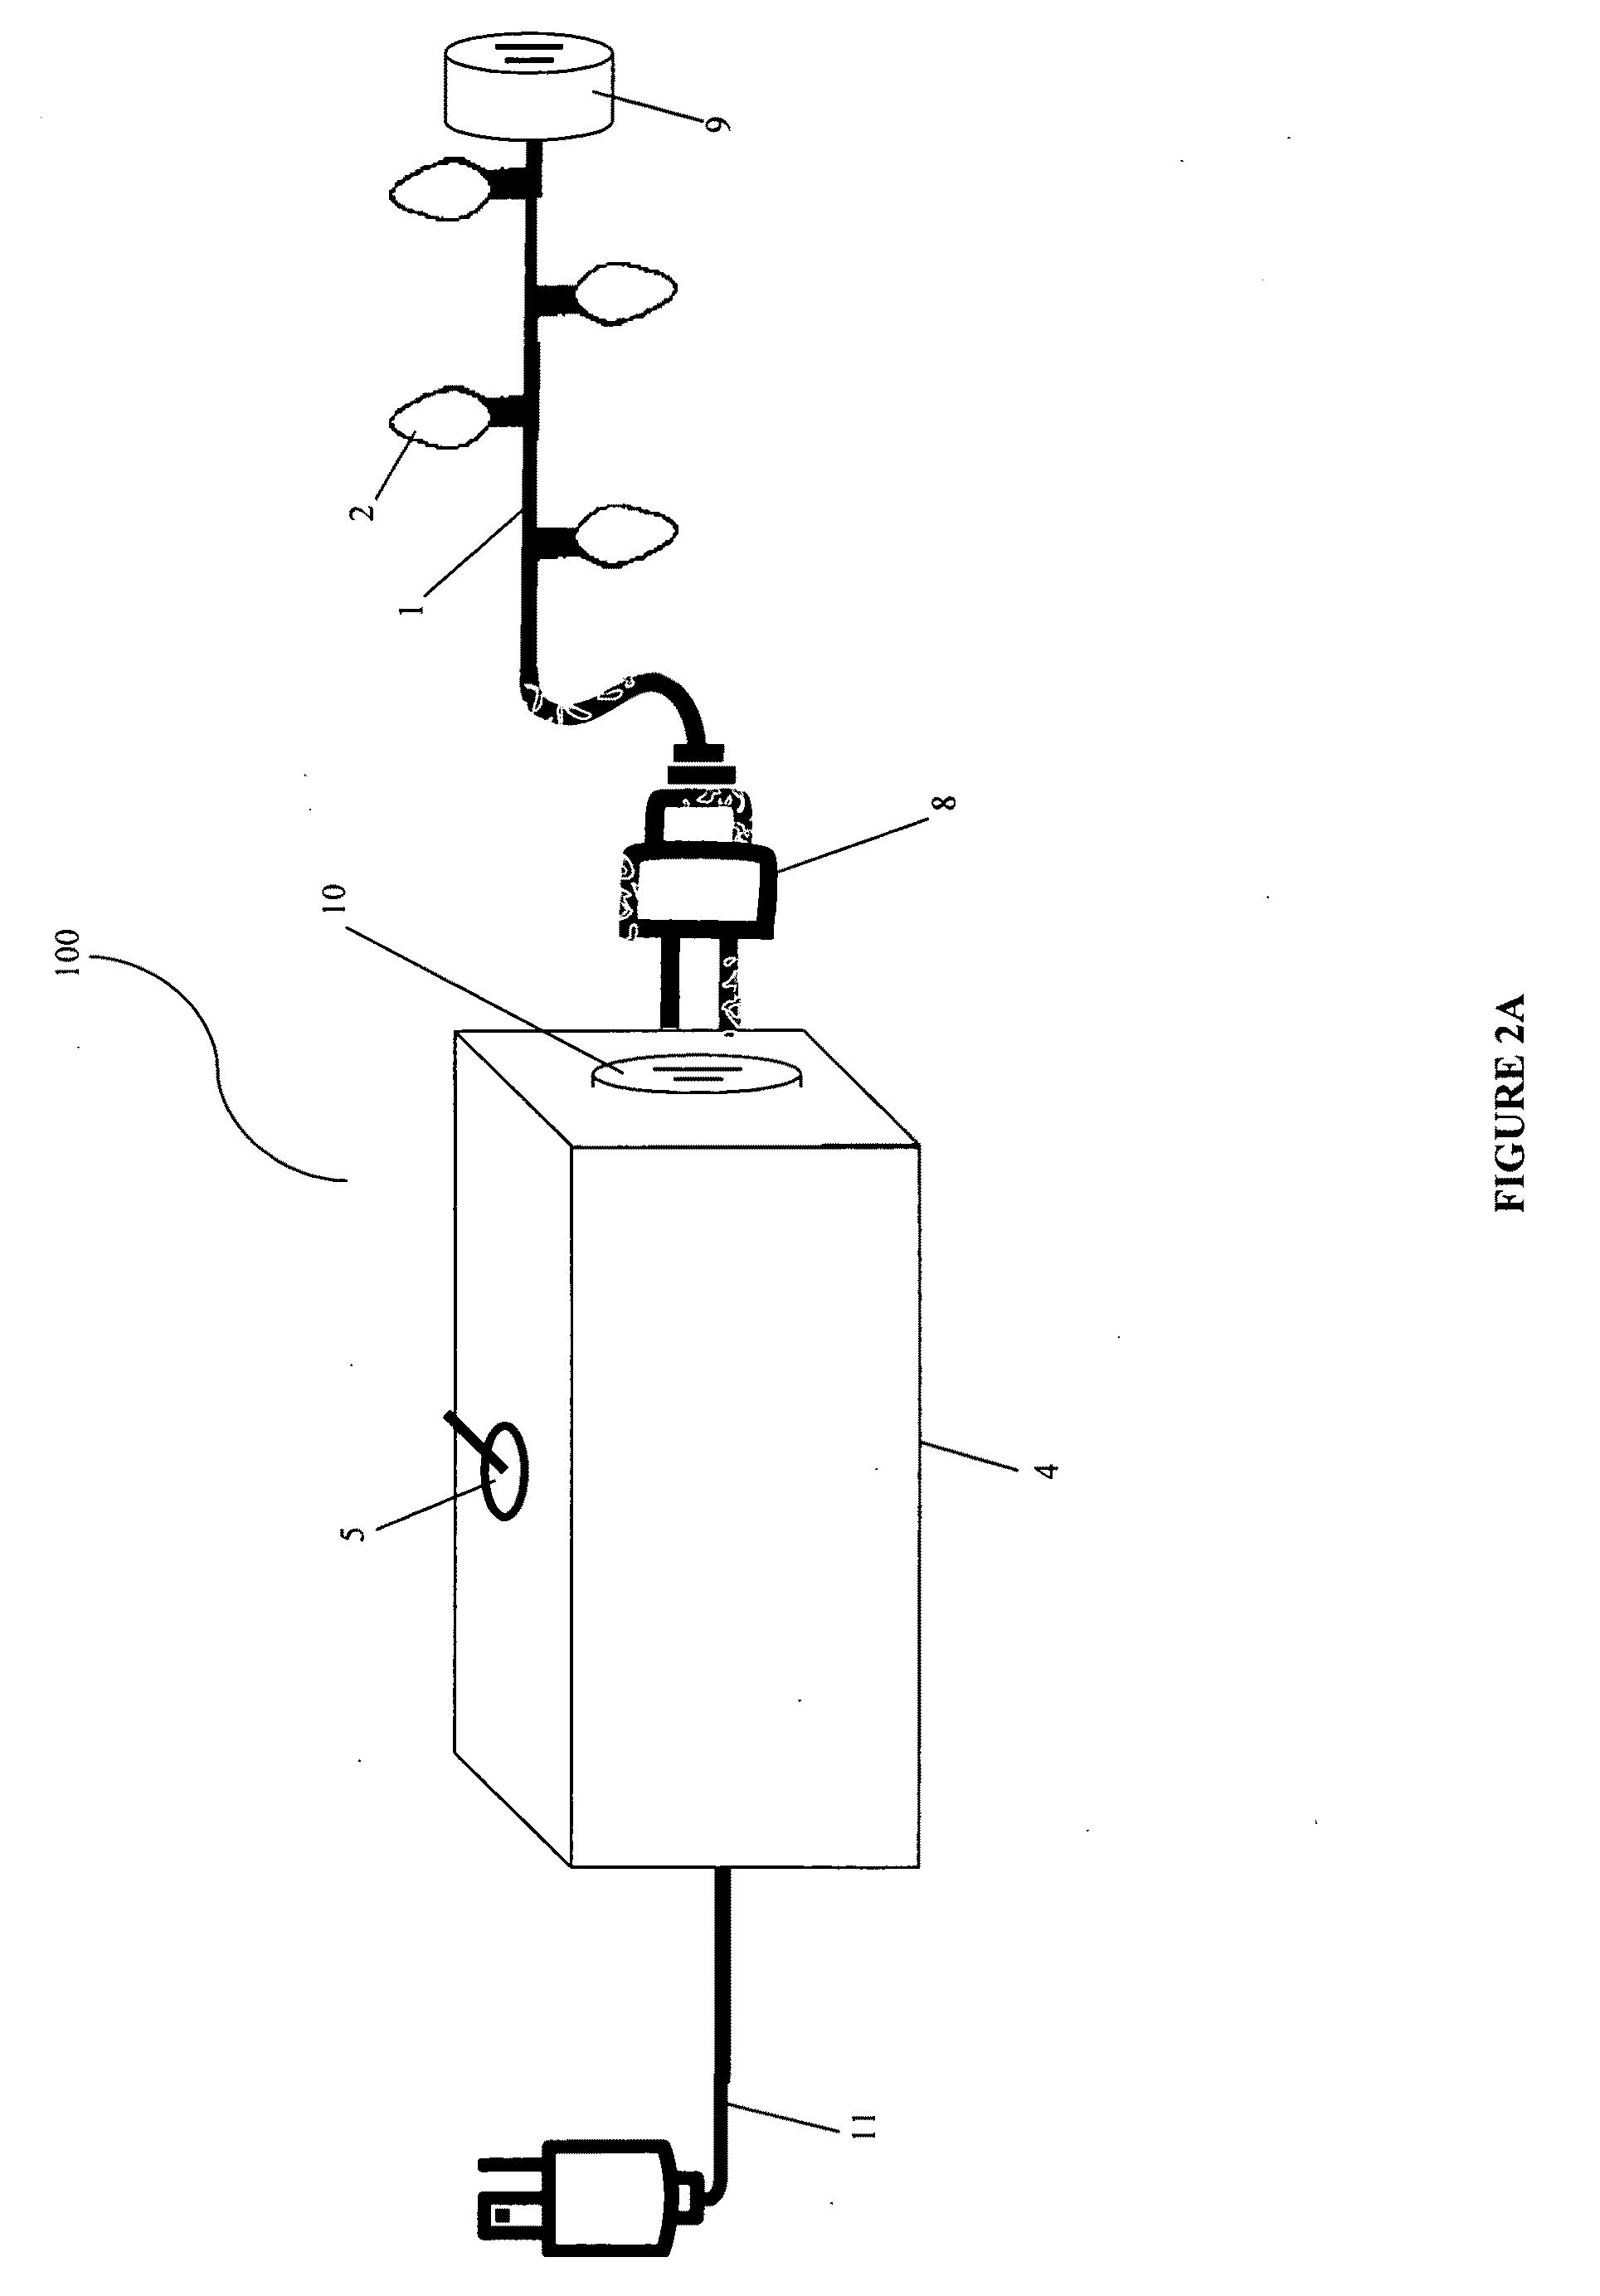 Holiday LED lighting system and methods of use